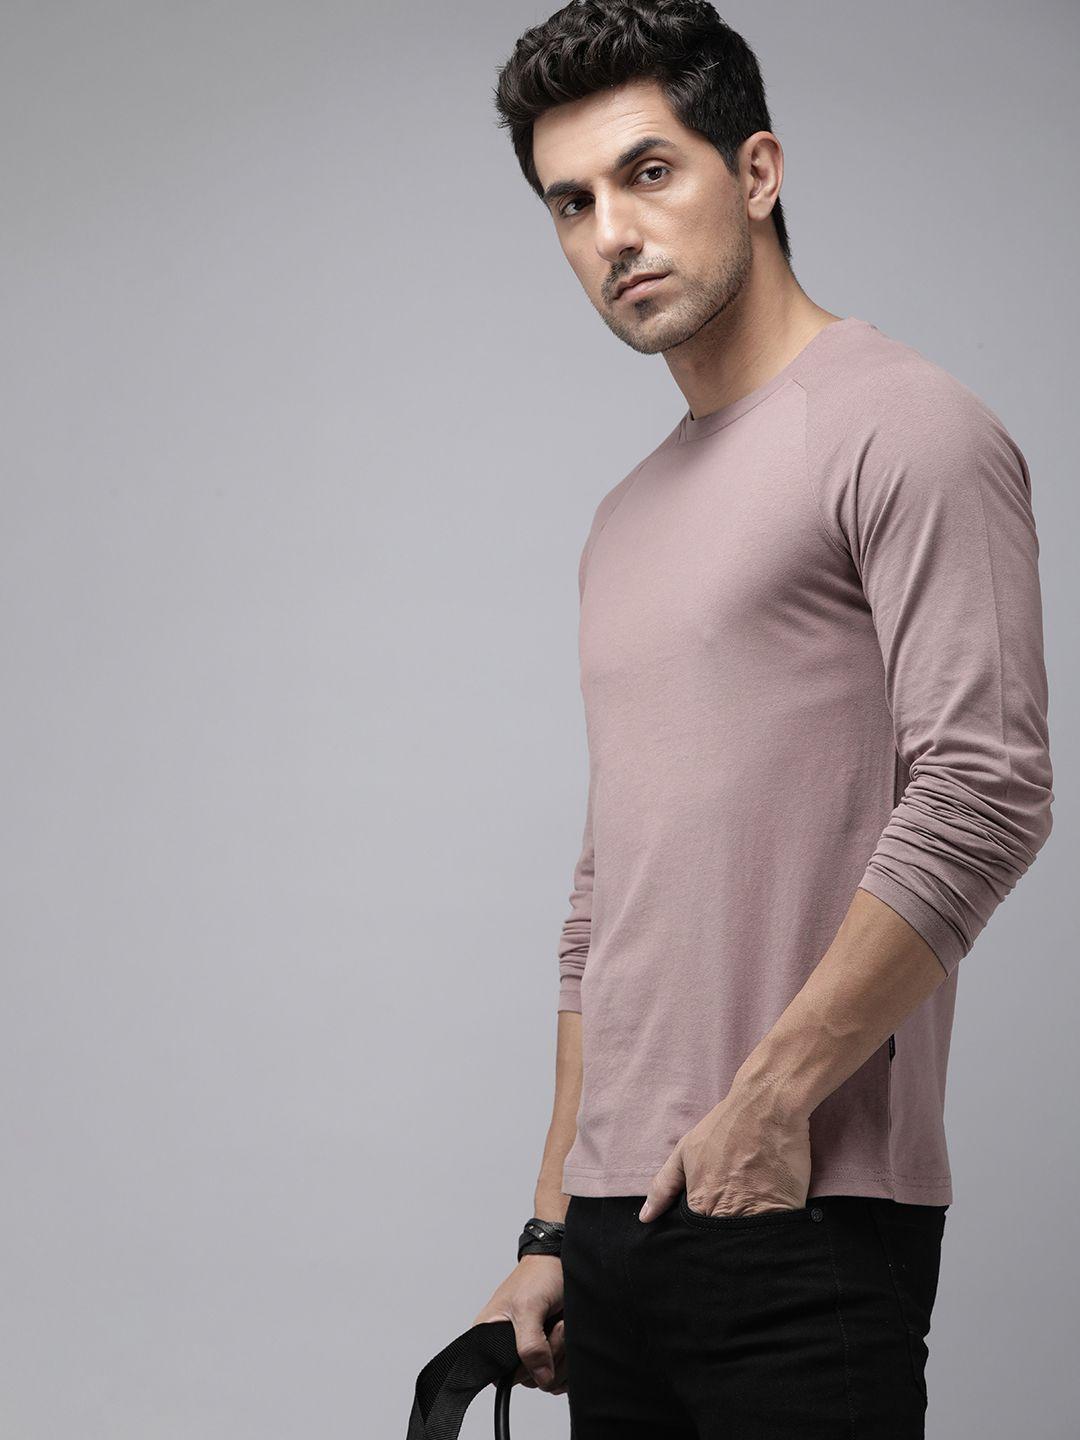 the roadster lifestyle co. men pure cotton solid raglan sleeves t-shirt